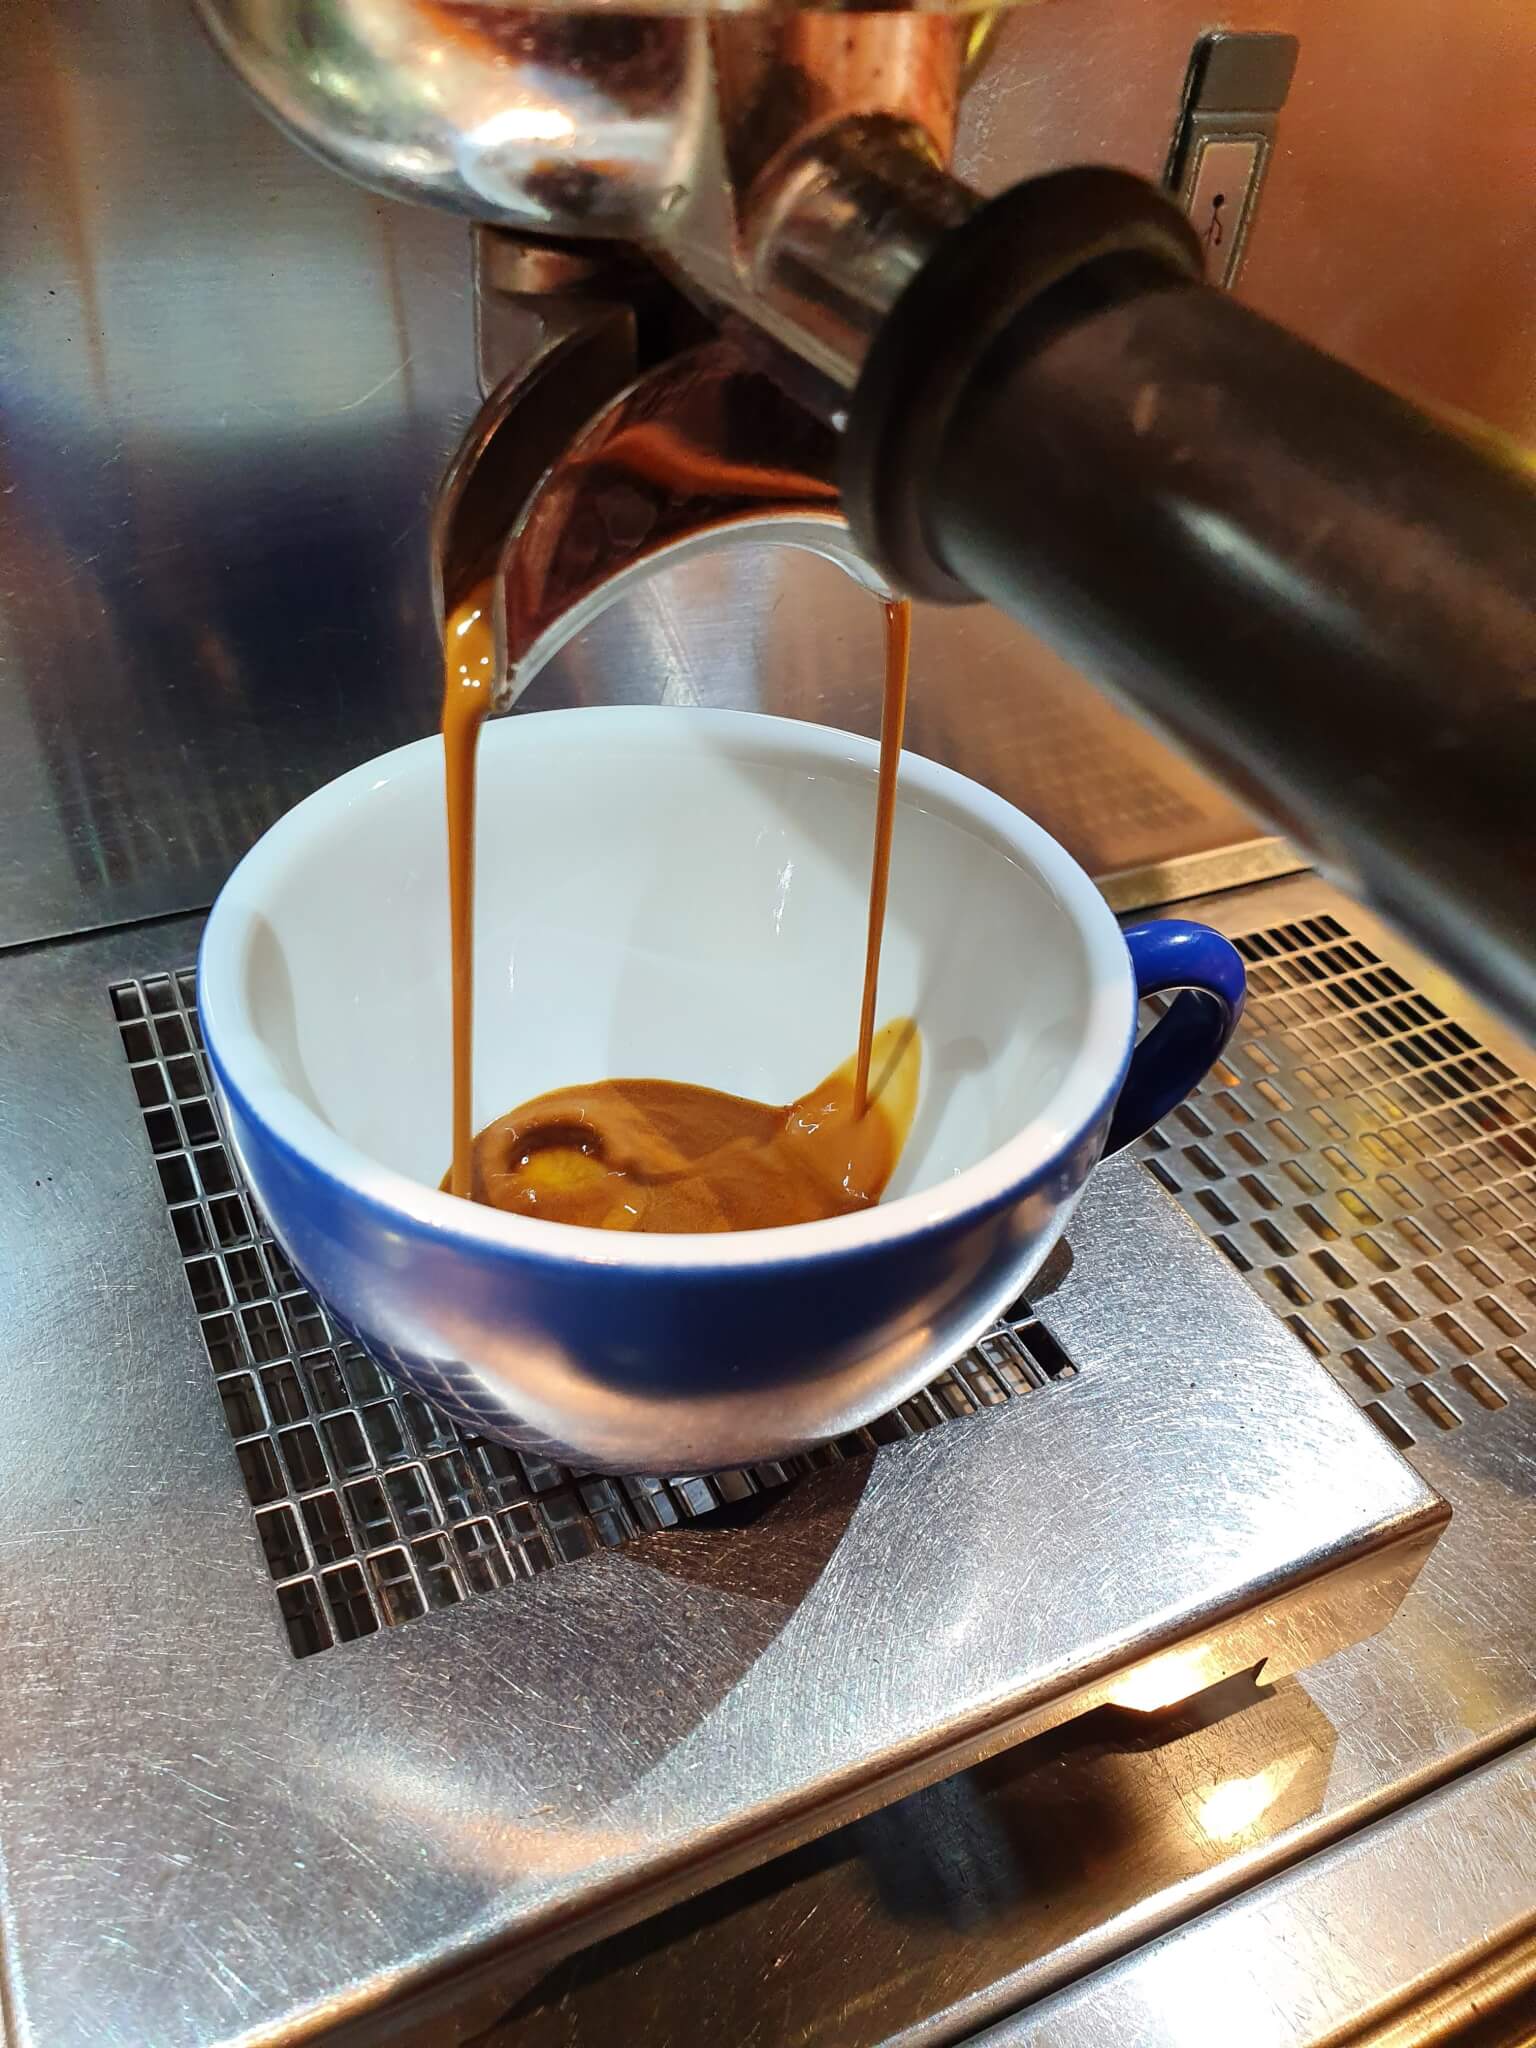 How to Make Better Espresso at Home: Equipment, Tips, and Techniques